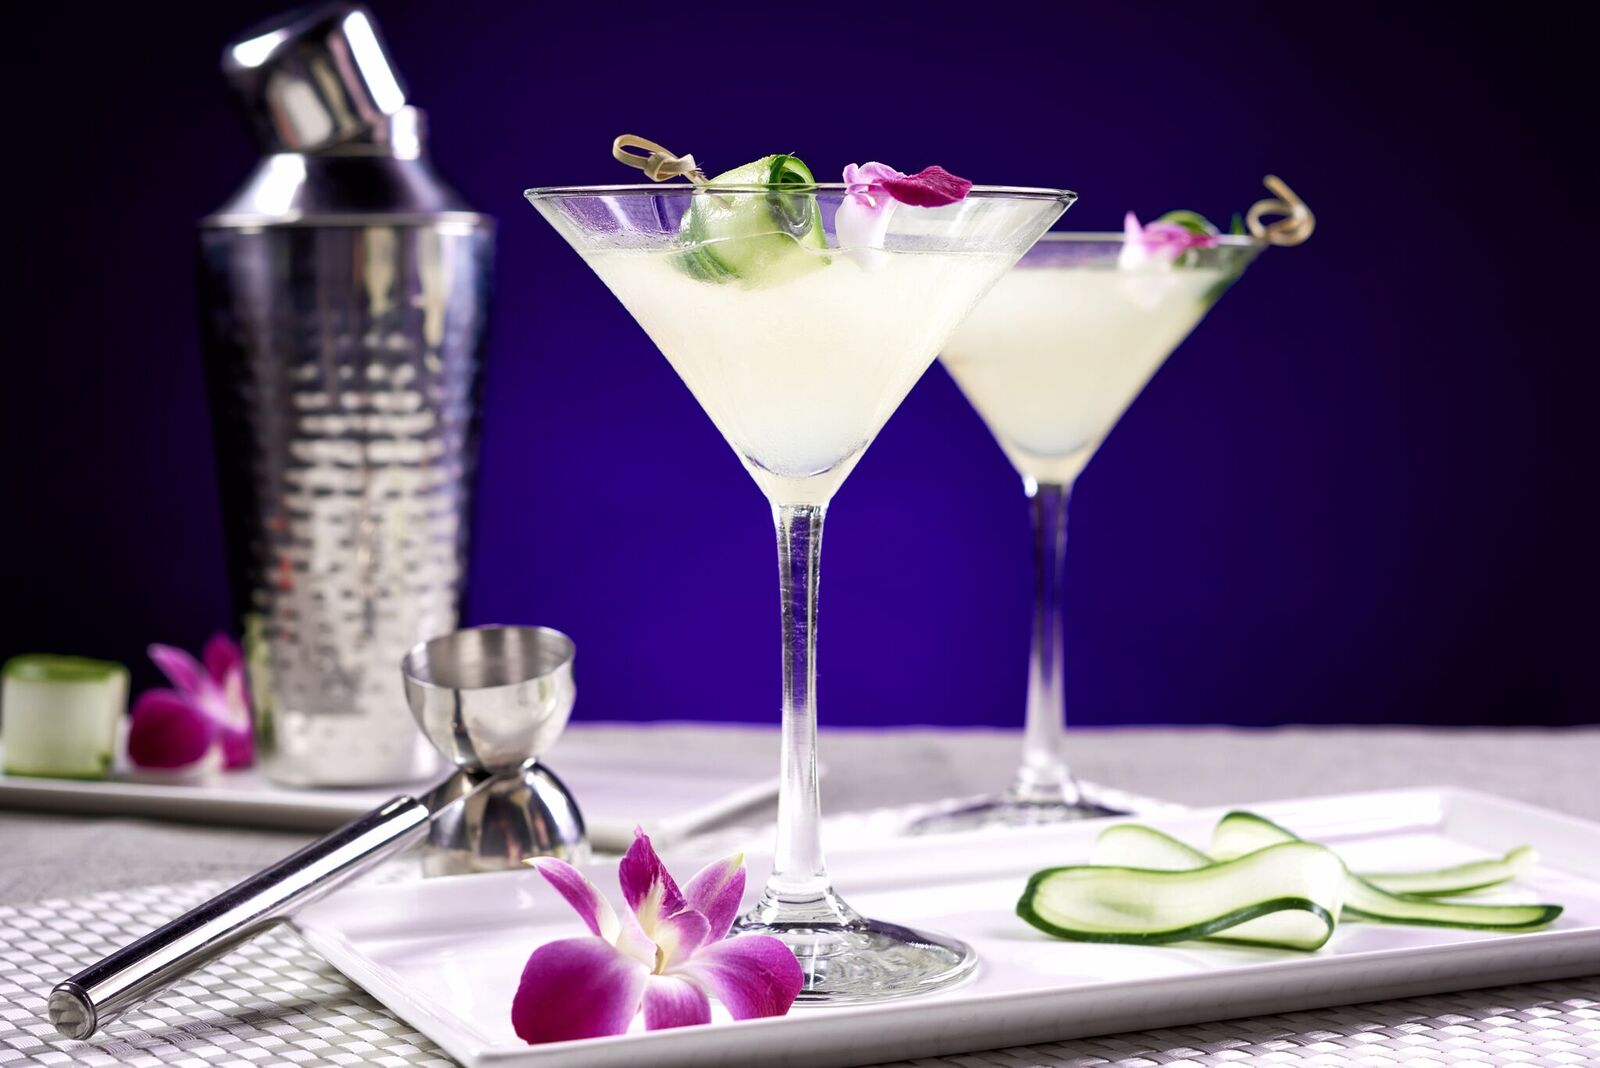 Celebrate National Martini Day with Morimoto Asia at Disney Springs on June 19th